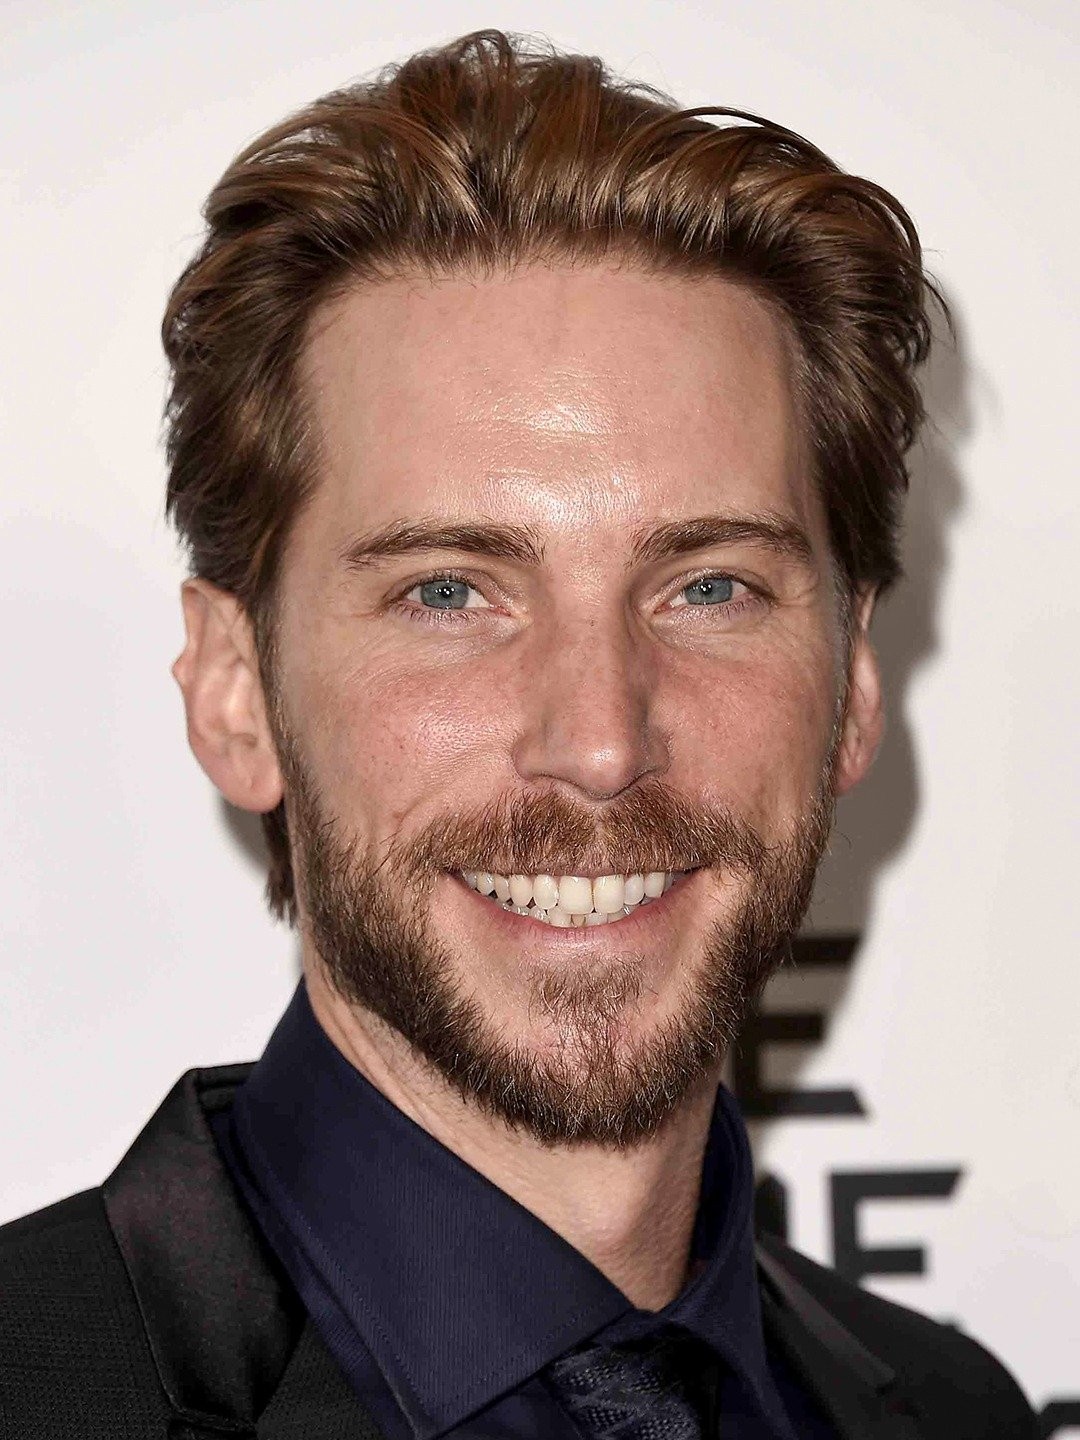 Troy Baker List of Movies and TV Shows - TV Guide